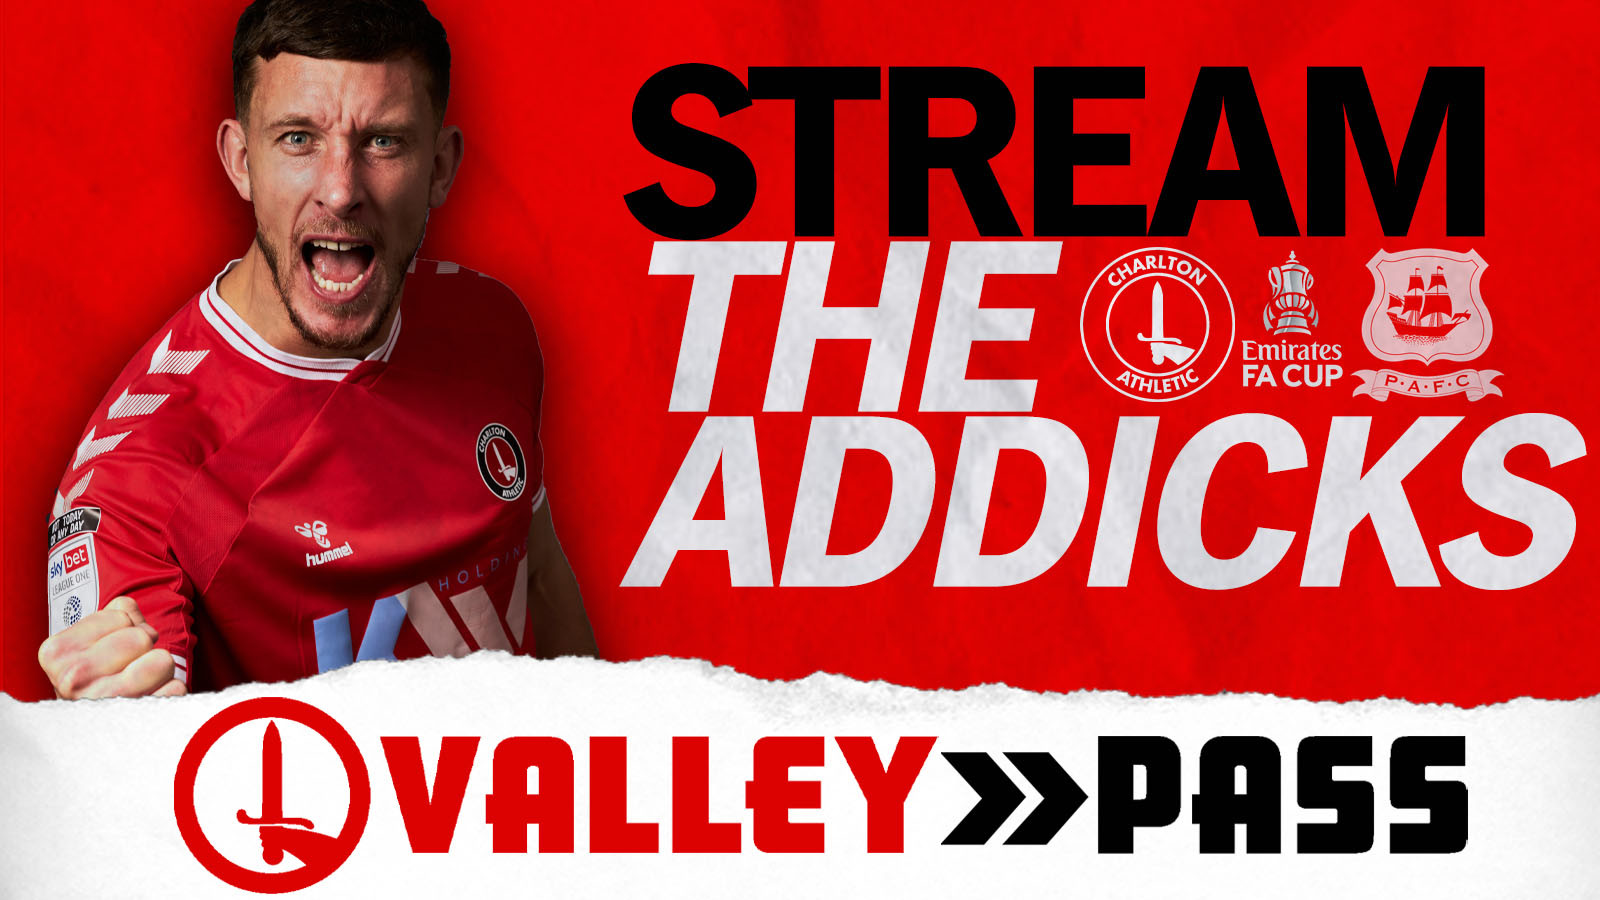 Get your live streaming video pass for Charlton v Plymouth Argyle in the FA Cup Charlton Athletic Football Club